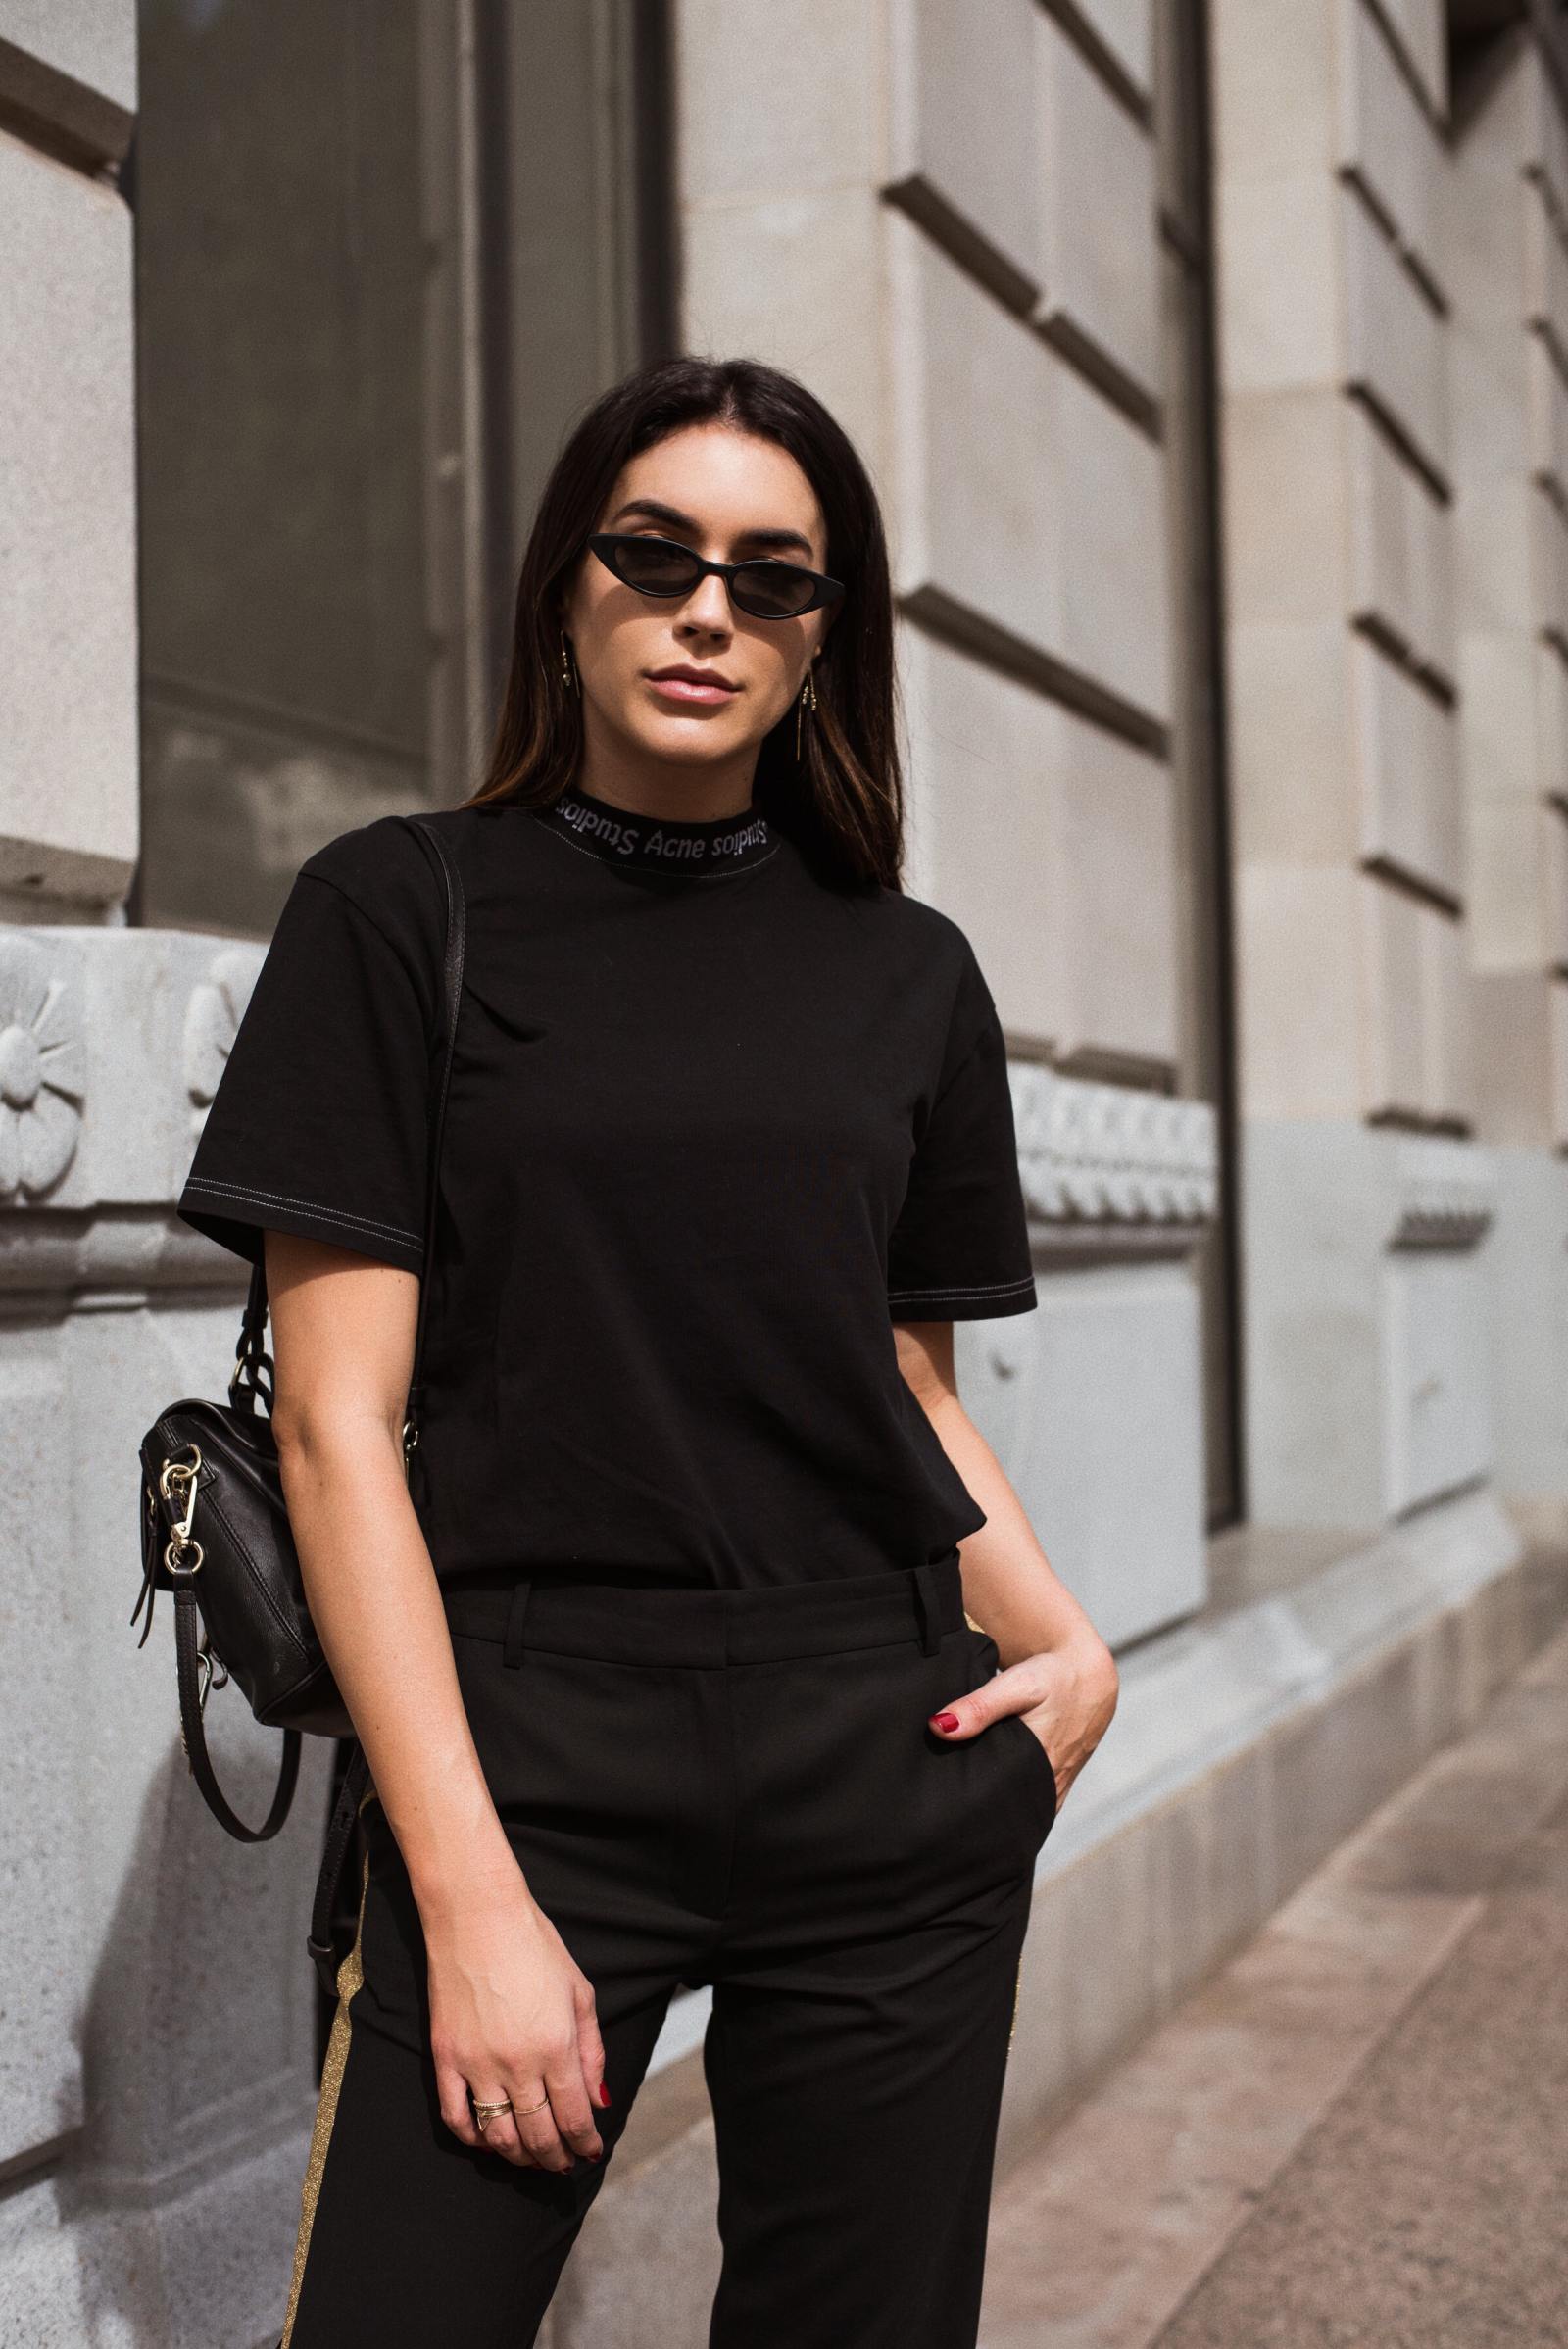 Wearing all black – Permanent Style